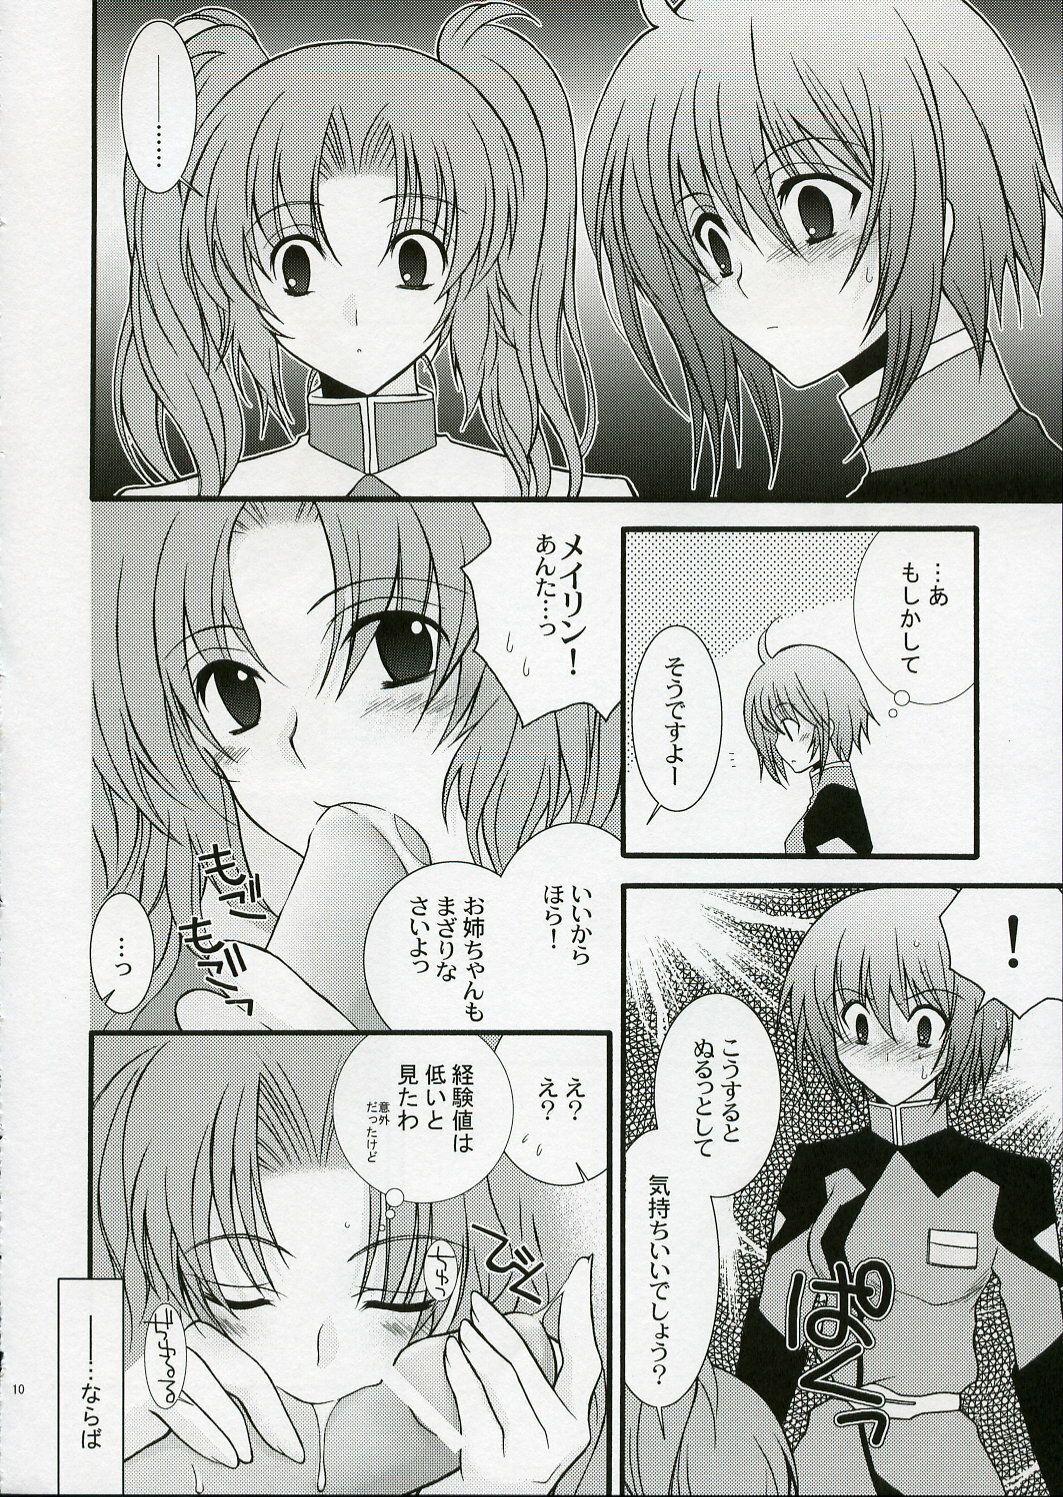 (SC28) [YLANG-YLANG (Ichie Ryouko)] RENDEZ-VOUS (Mobile Suit Gundam SEED DESTINY) page 9 full